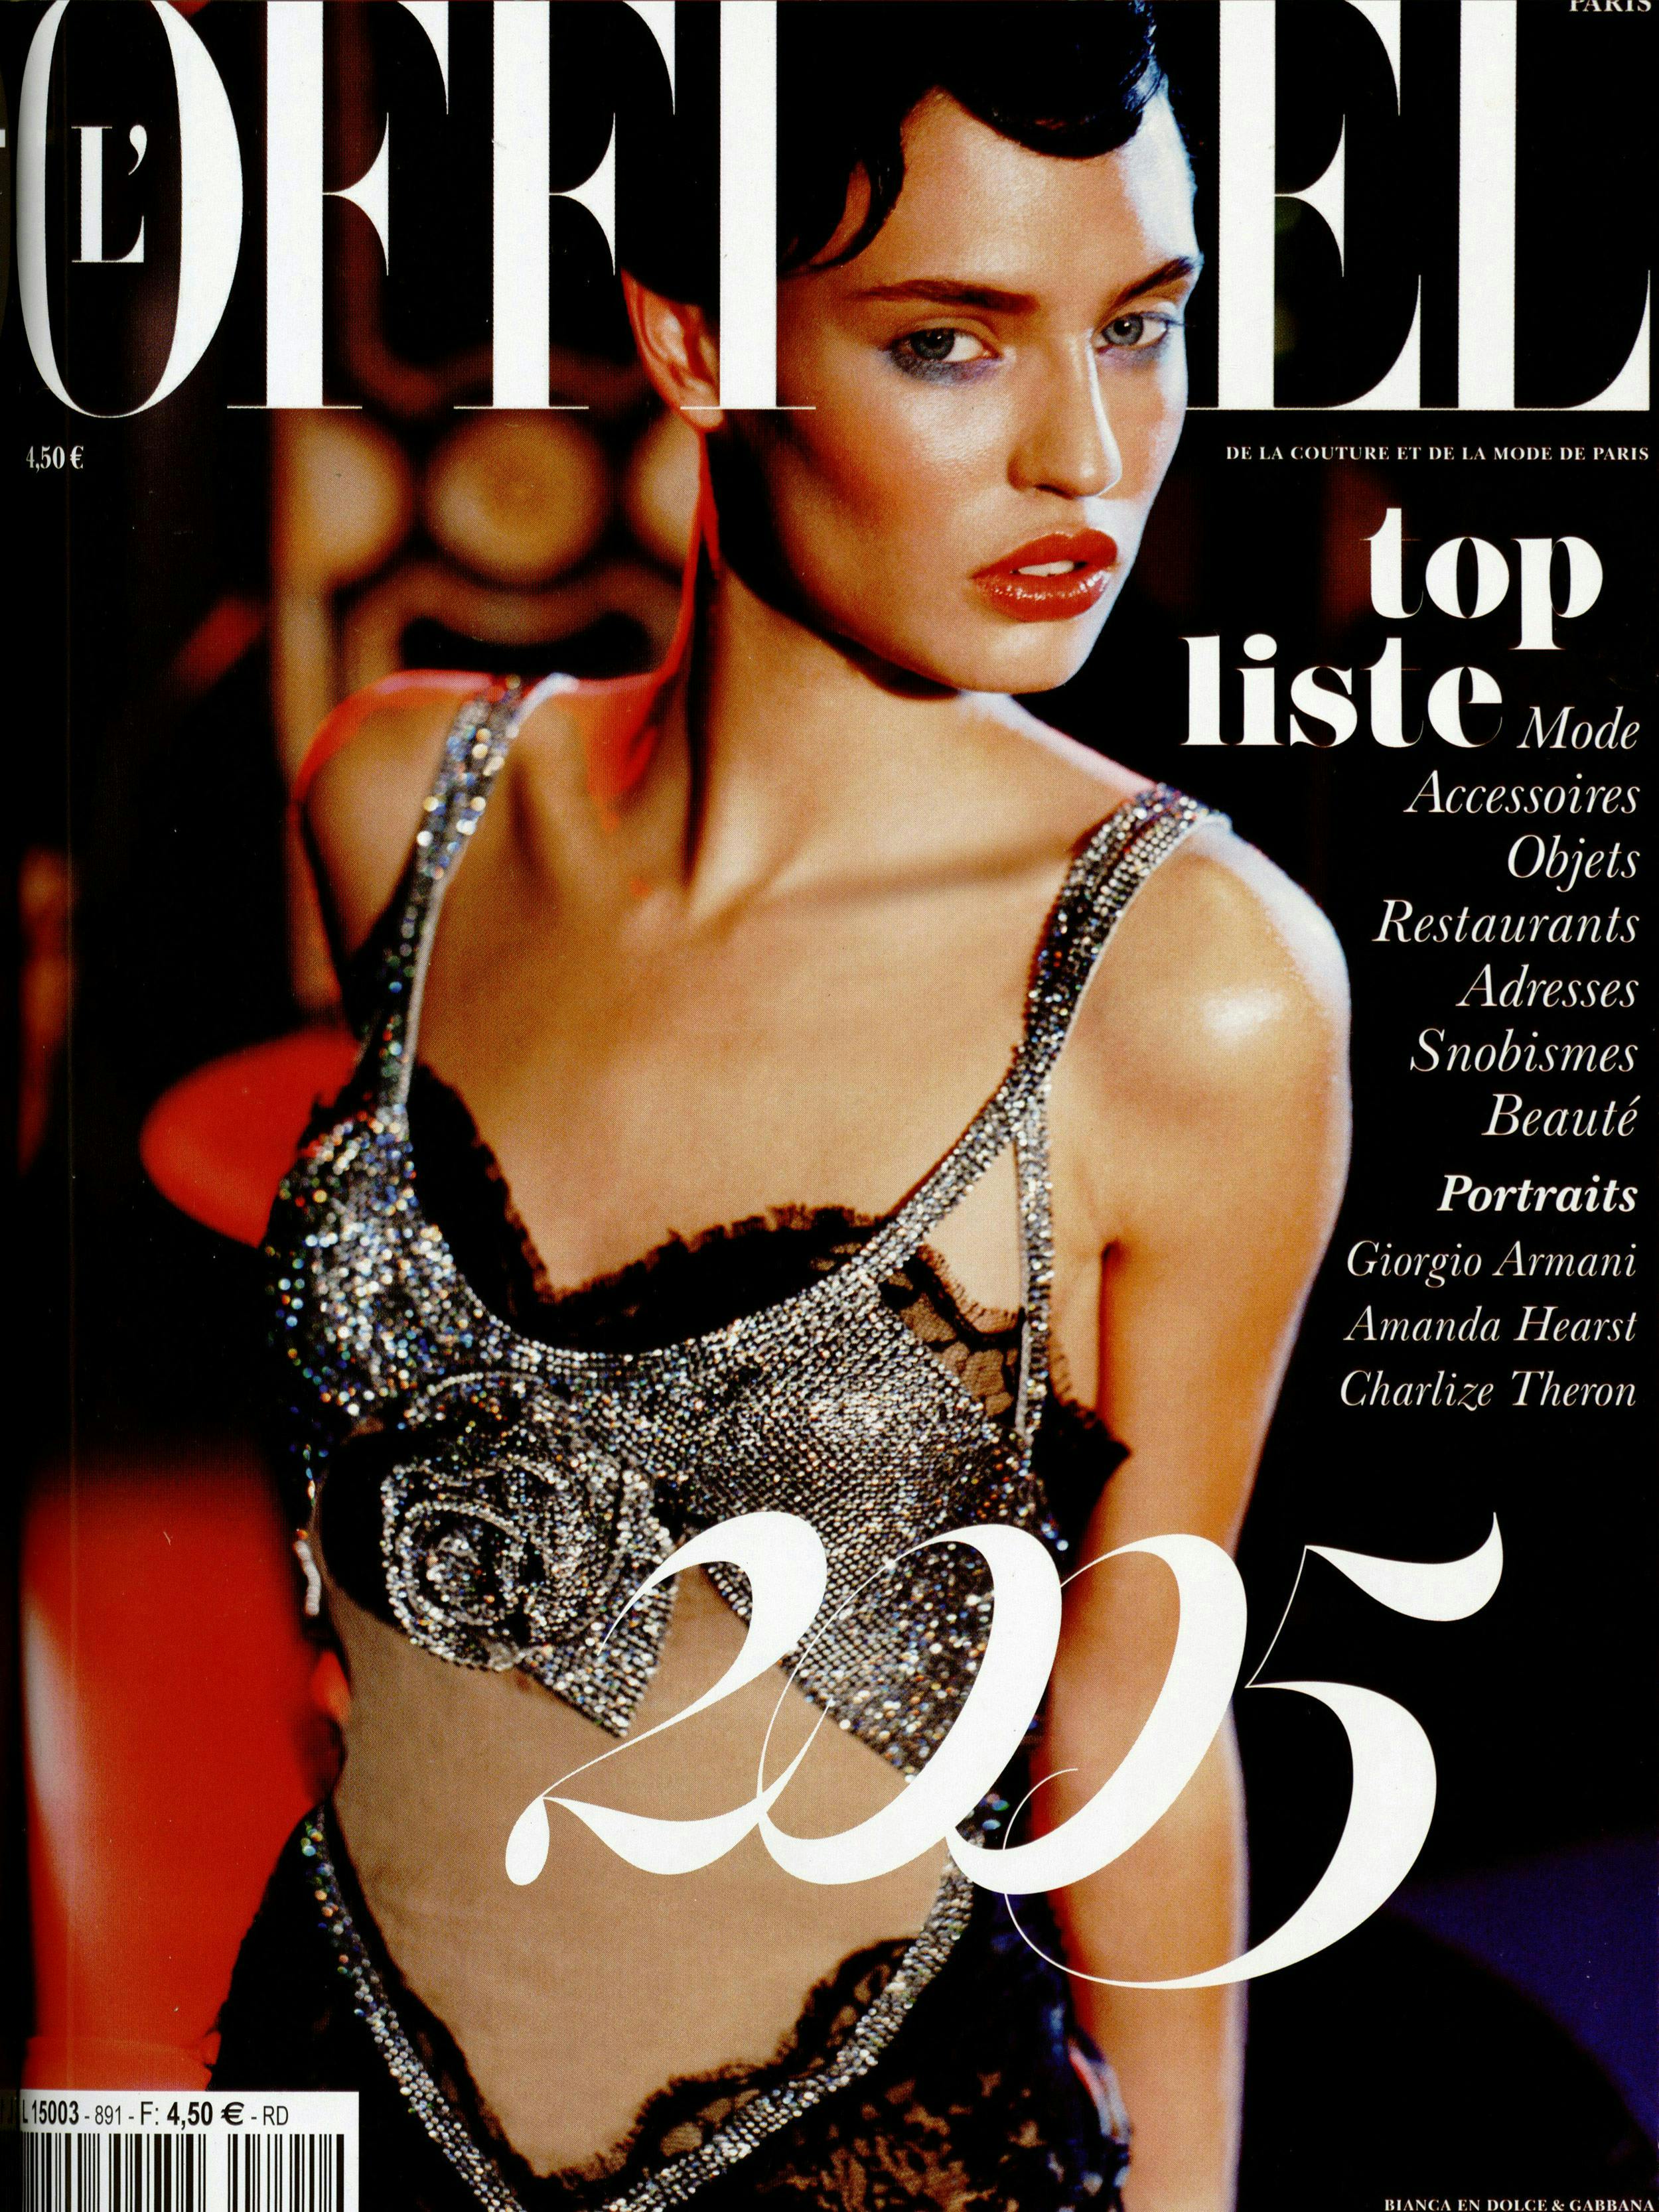 Model wearing a sequin top for L'Officiel Magazine cover for 2005 edition